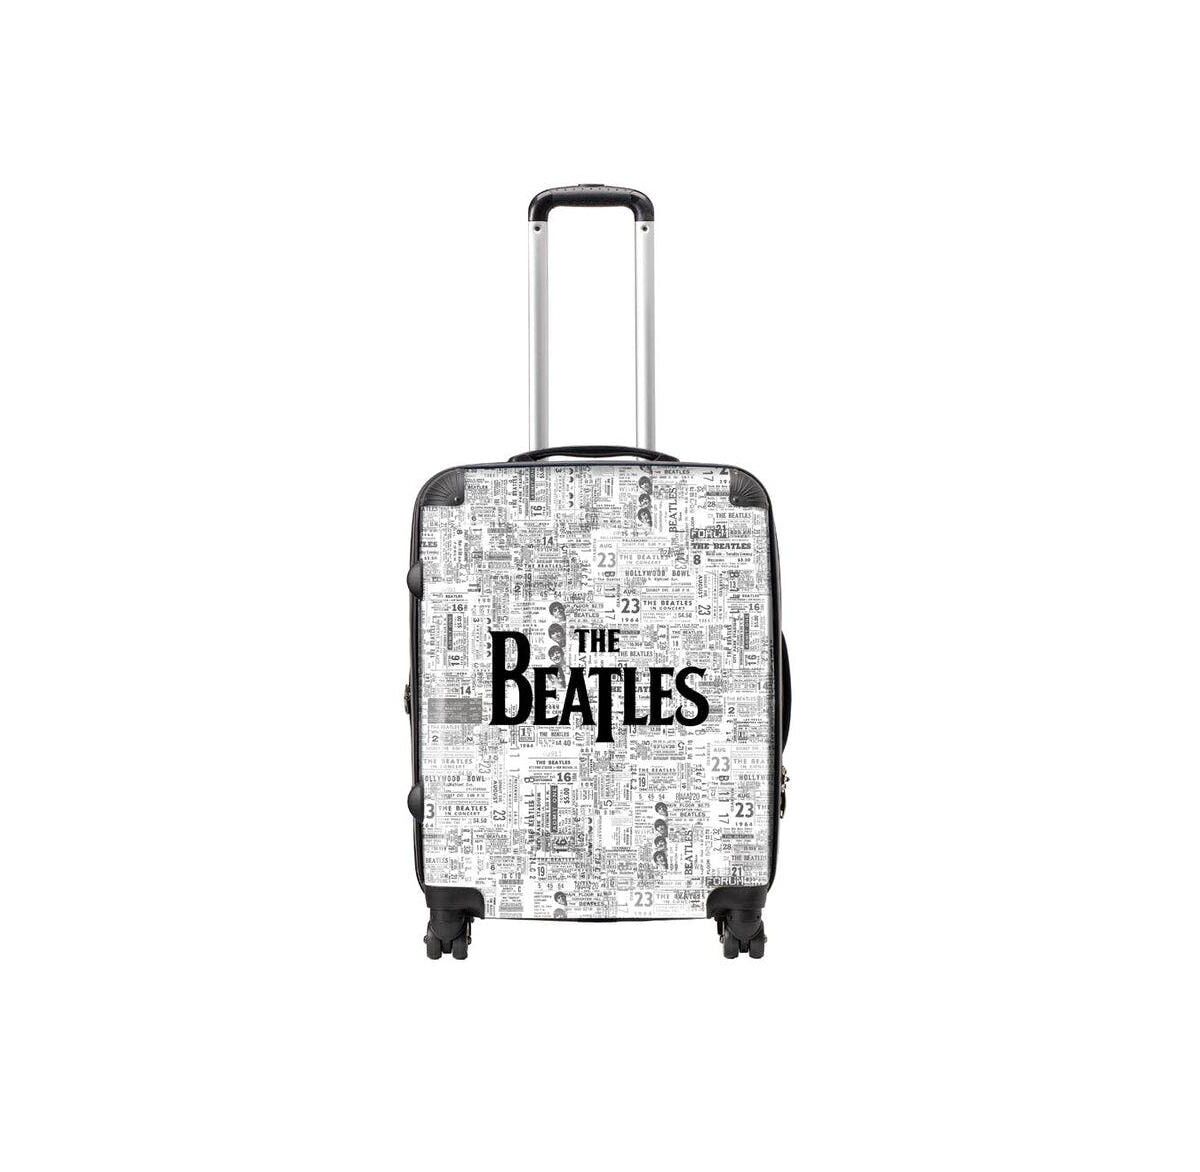 Rocksax The Beatles Tour Series Luggage - Tickets - Large - Check In - Multi-colored